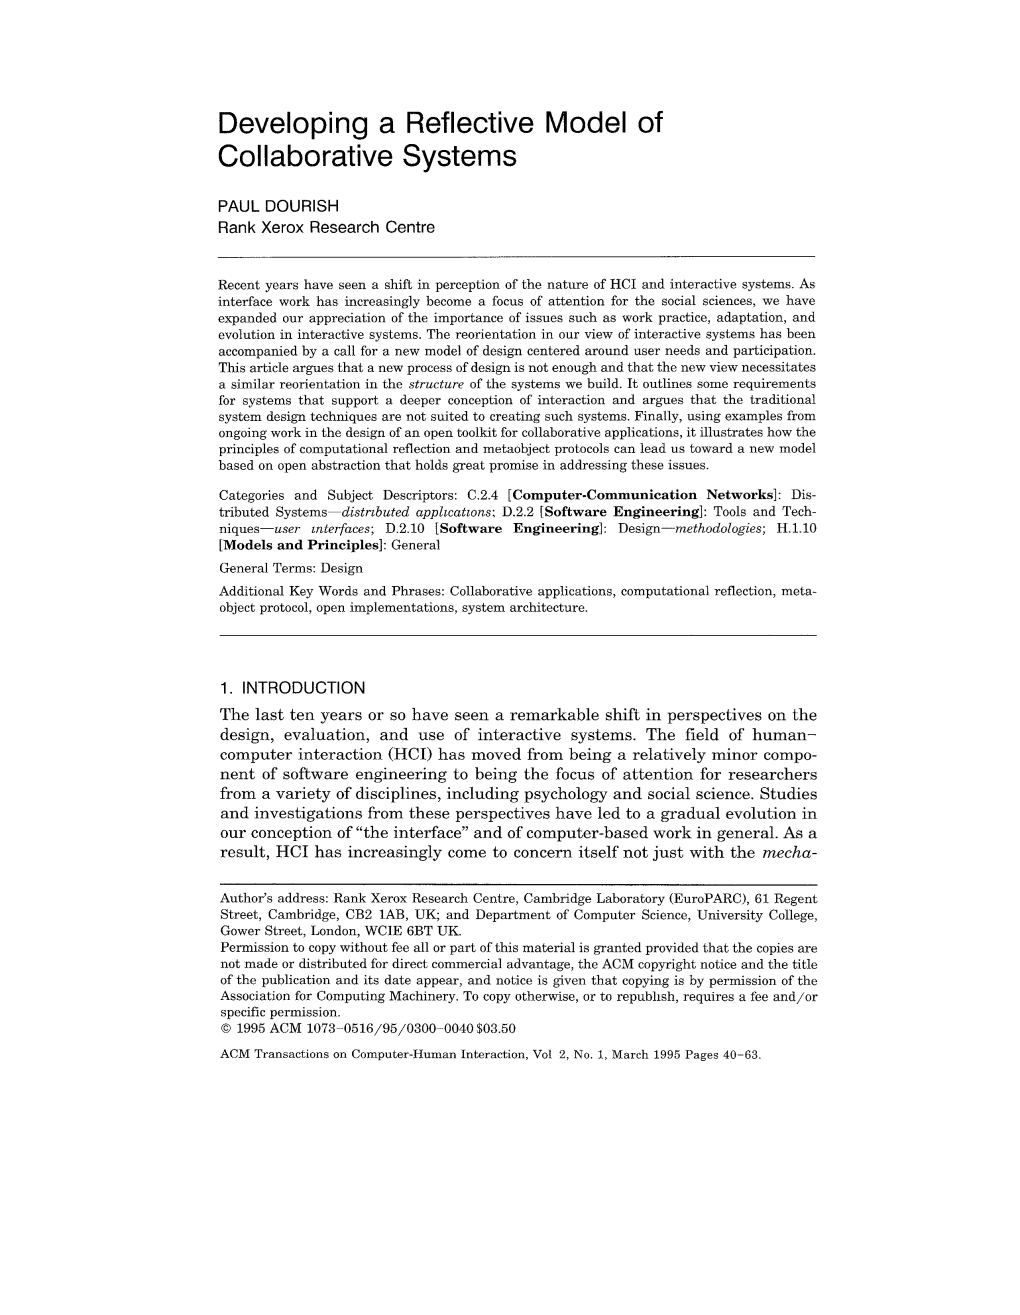 Developing a Reflective Model of Collaborative Systems